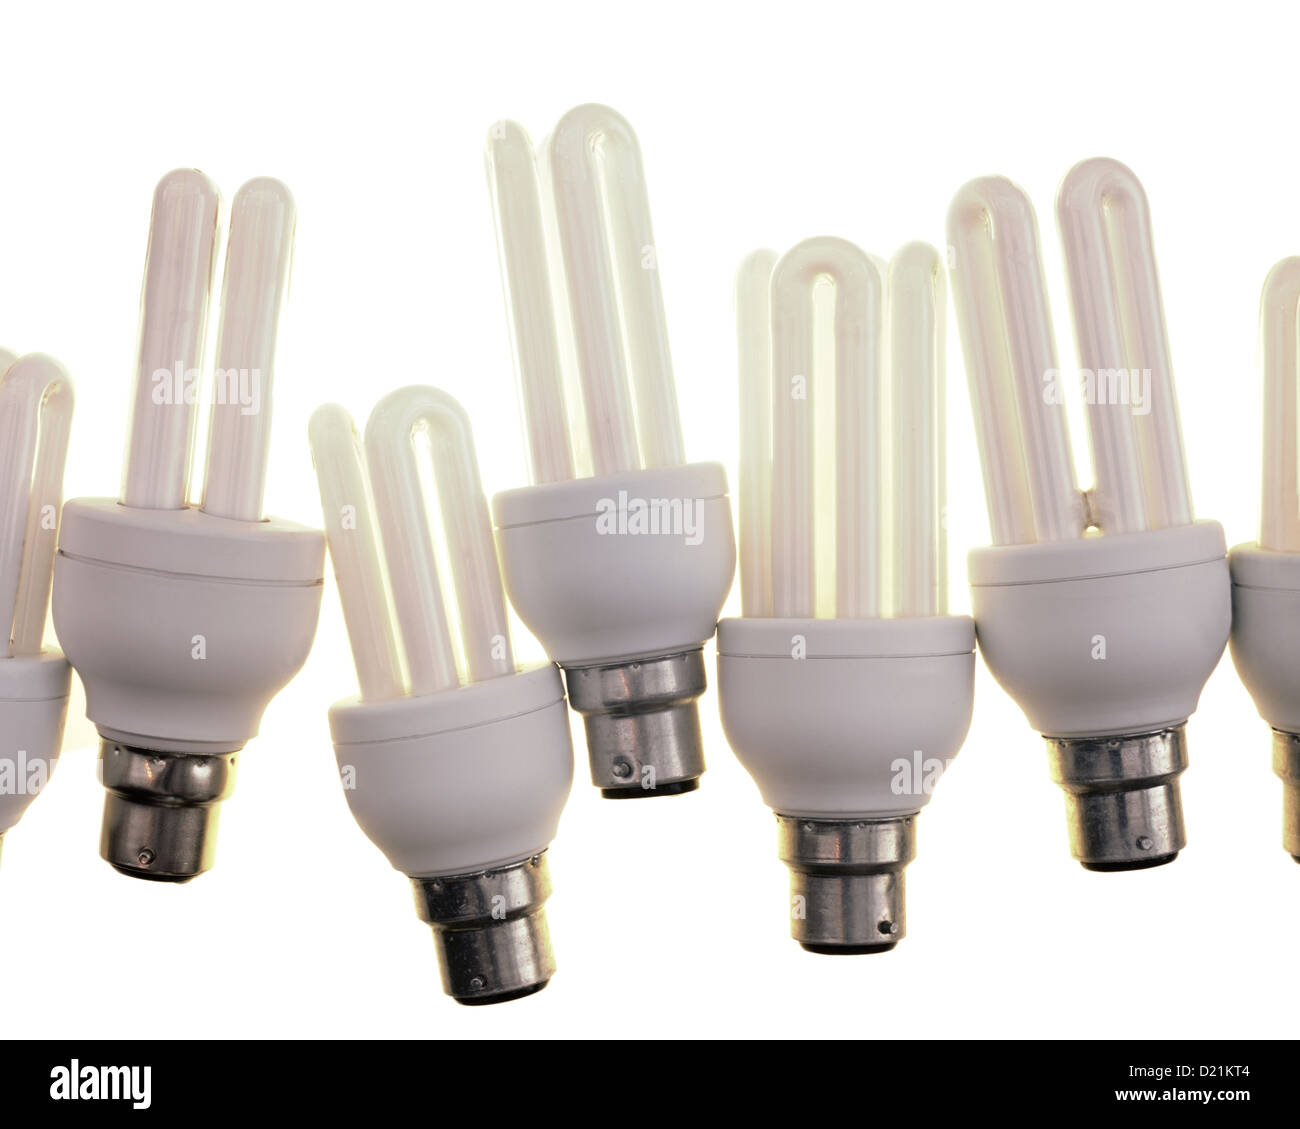 A line of energy efficient light bulbs in a line on a white background. Stock Photo